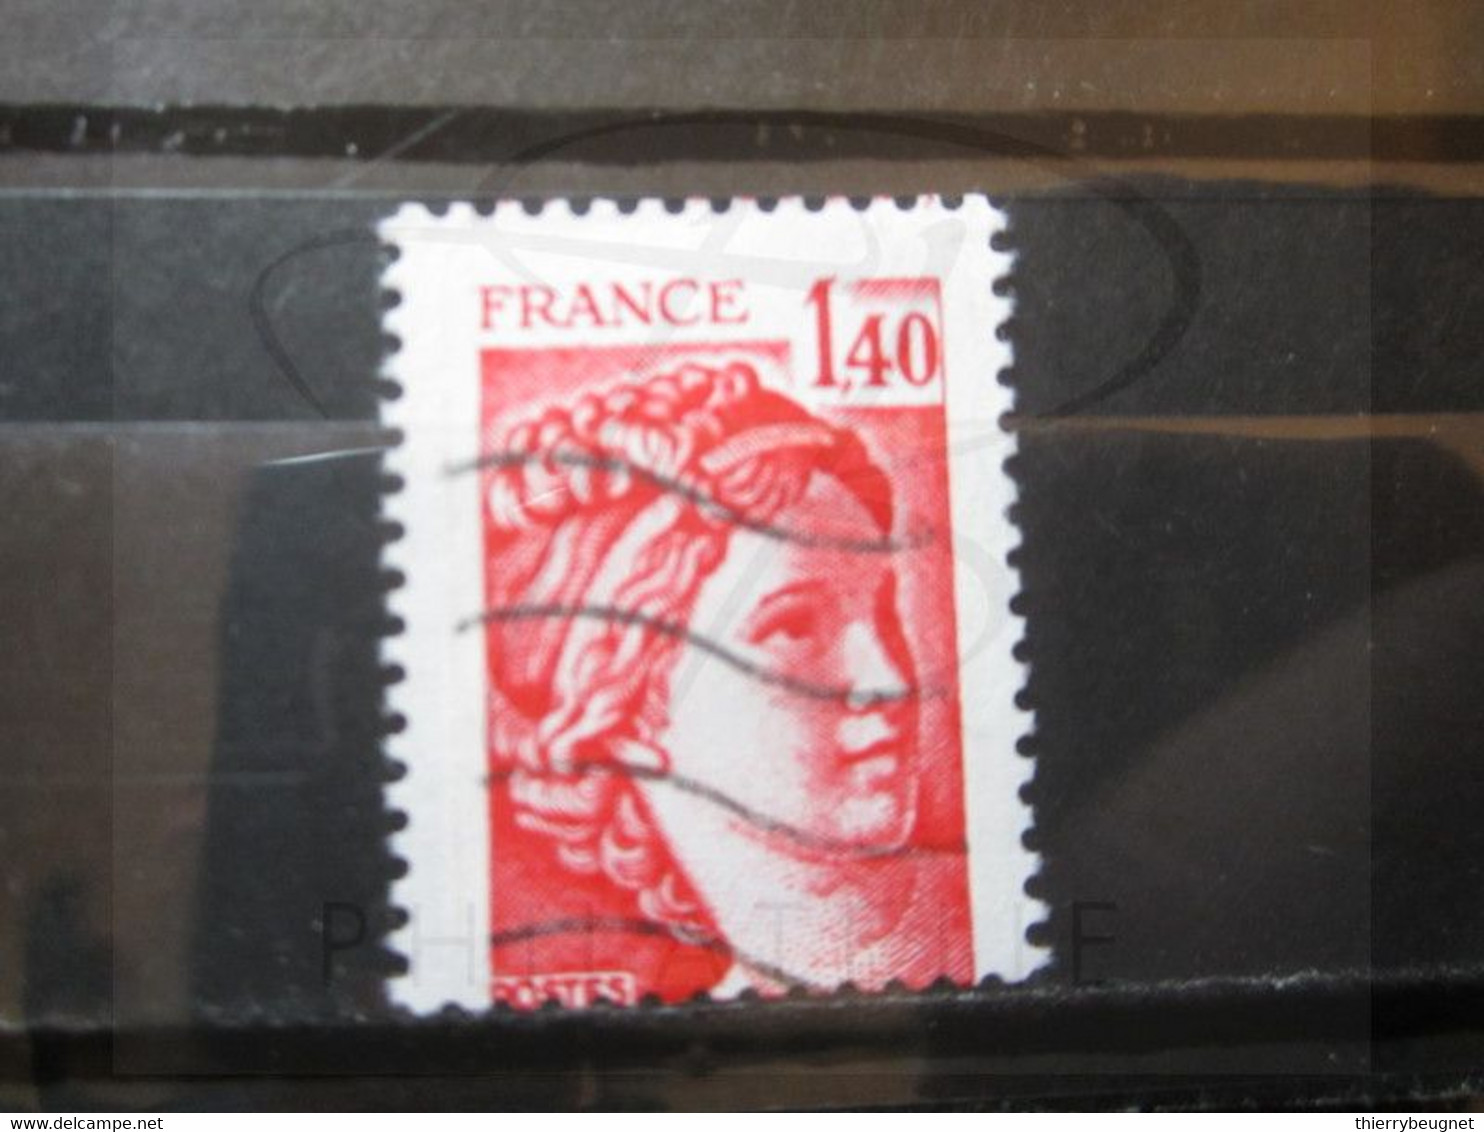 VEND BEAU TIMBRE DE FRANCE N° 2102 , PIQUAGE DECALE !!! - Used Stamps